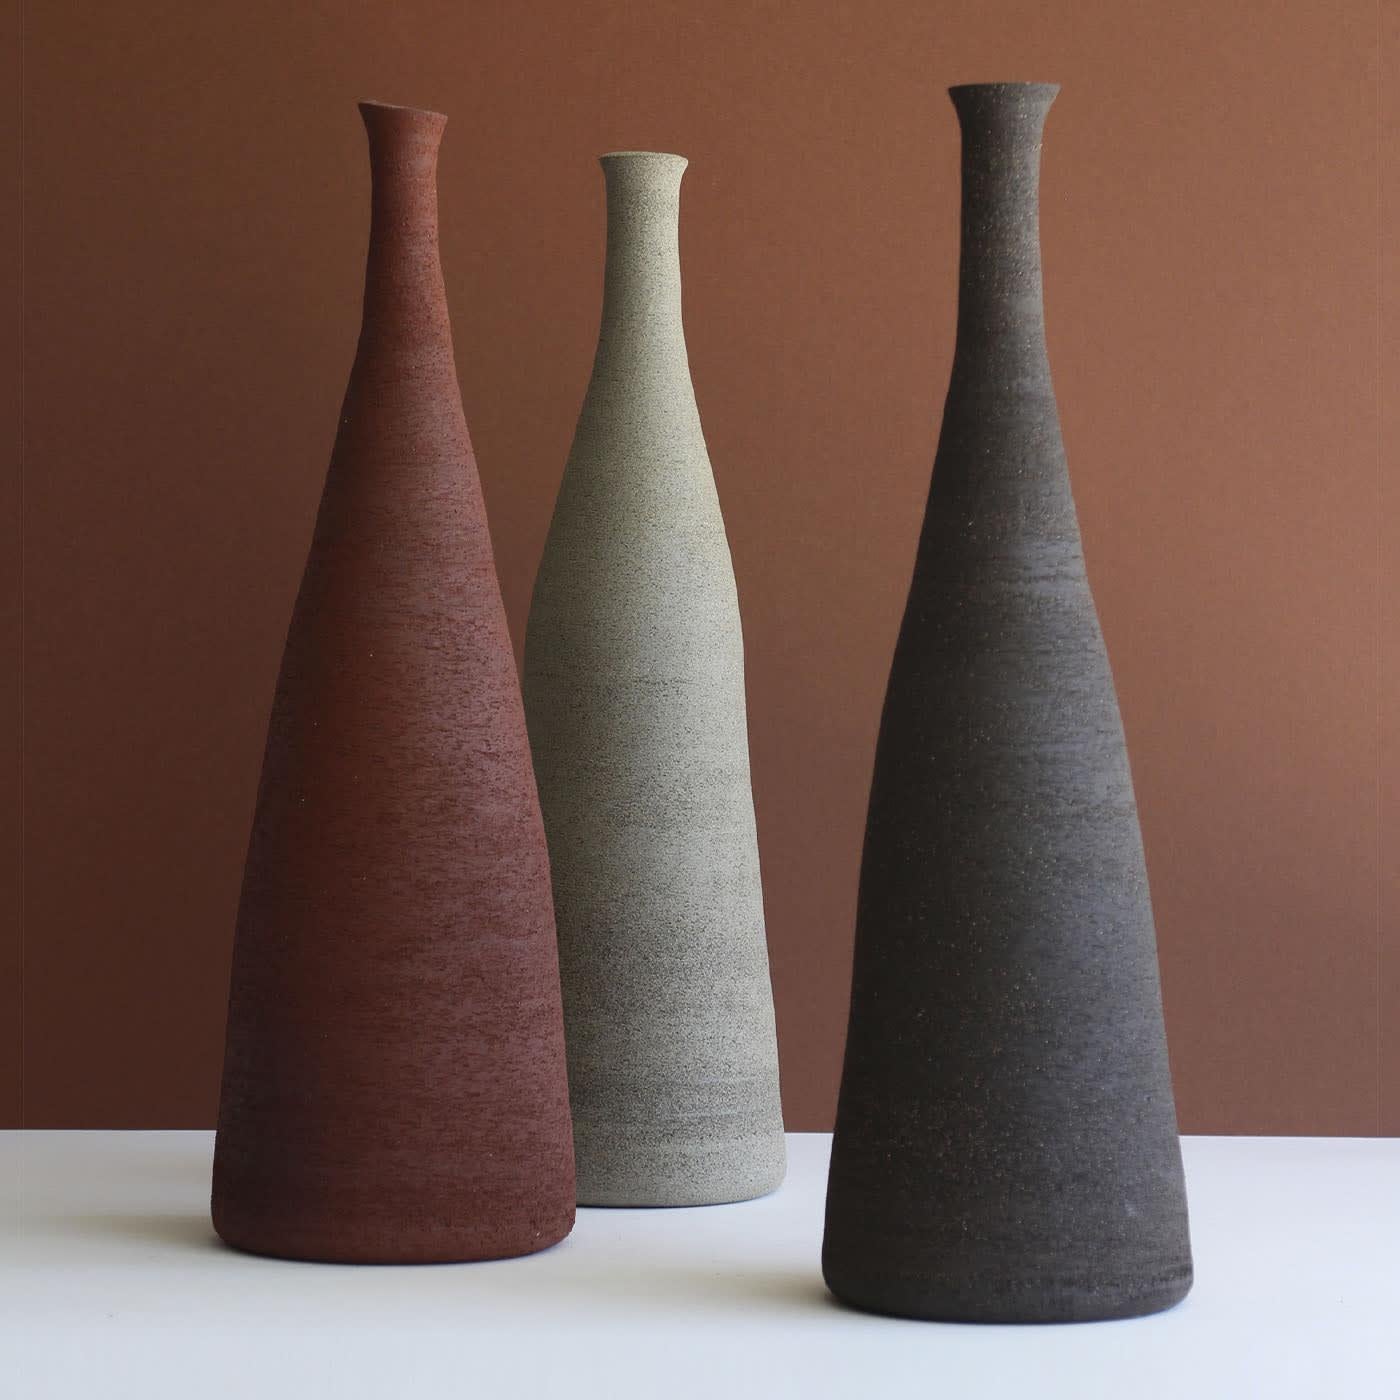 A sophisticated sculptural silhouette defines this singular stoneware vase, an exclusive and warm addition to contemporary settings. Deftly crafted by hand and naturally unique, it flaunts a deep reddish tone enhanced by a scratched texture for a